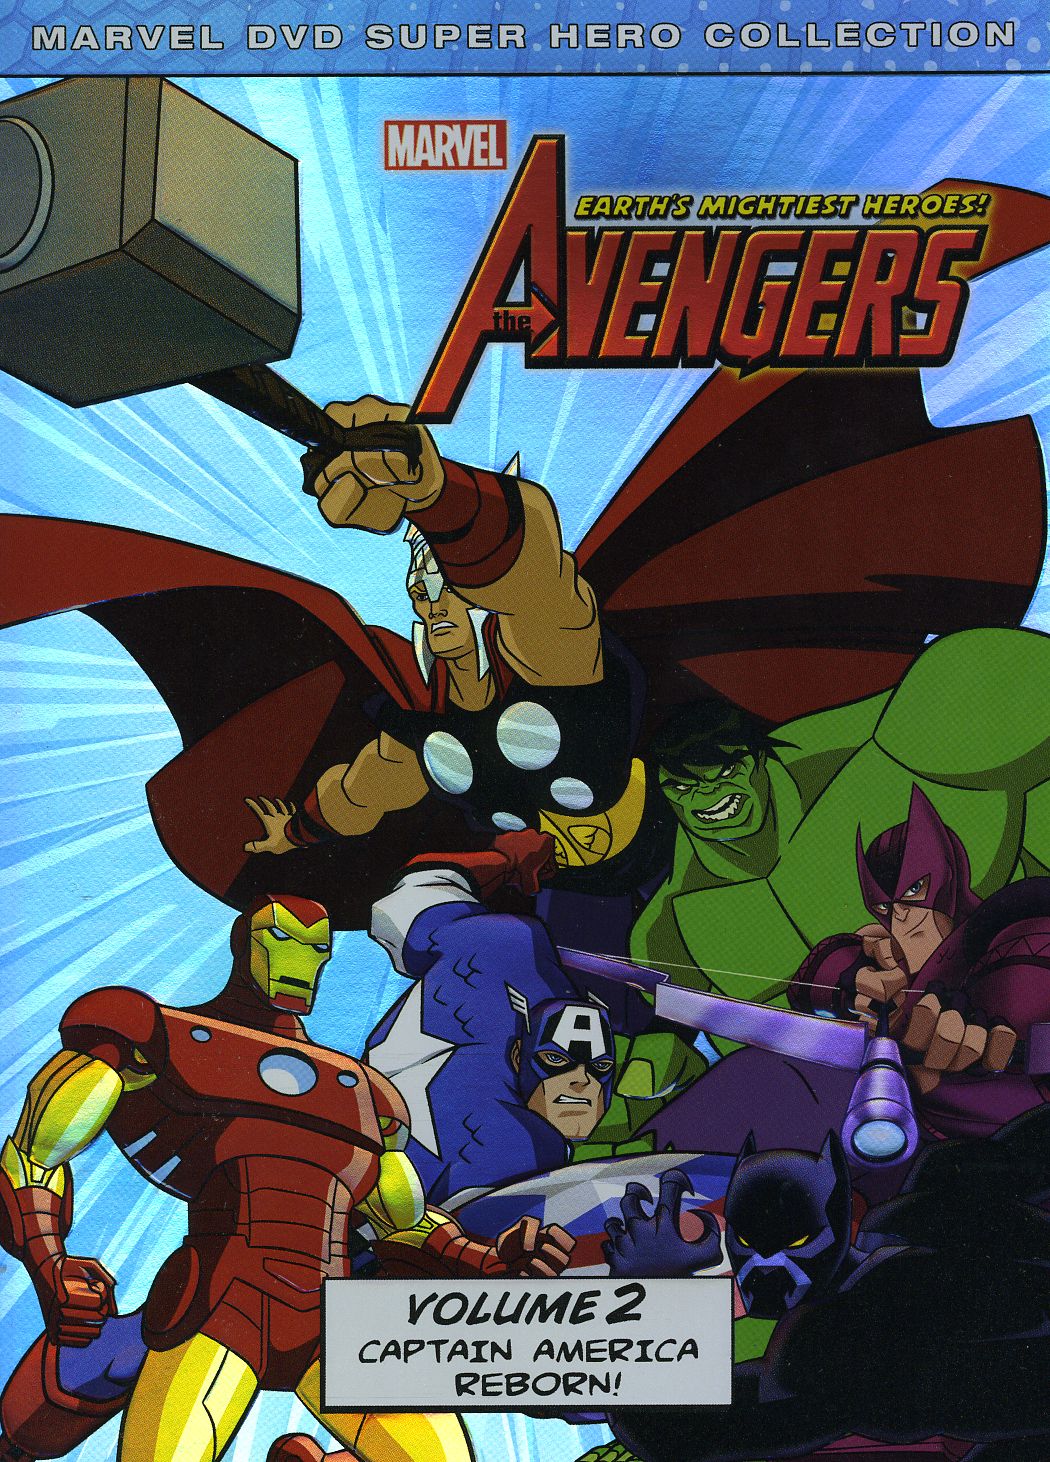 MARVEL THE AVENGERS: EARTH'S MIGHTIEST HEROES 2